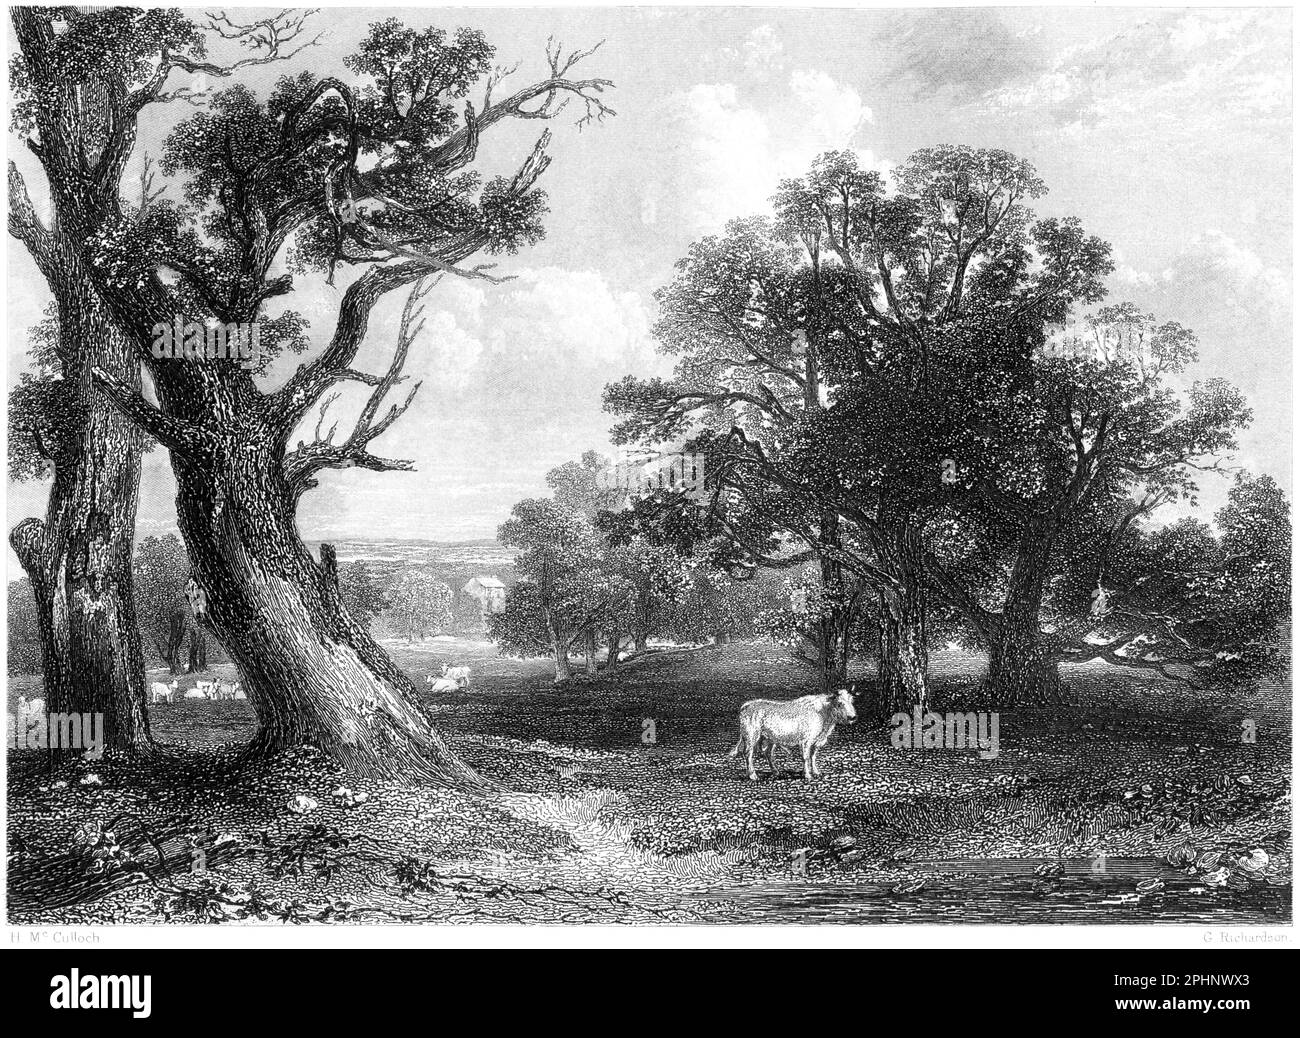 Engraving of a Scene in Cadyow (Cadzow) Park, Lanarkshire, Scotland UK scanned at high res from a book printed in 1840. Believed copyright free. Stock Photo